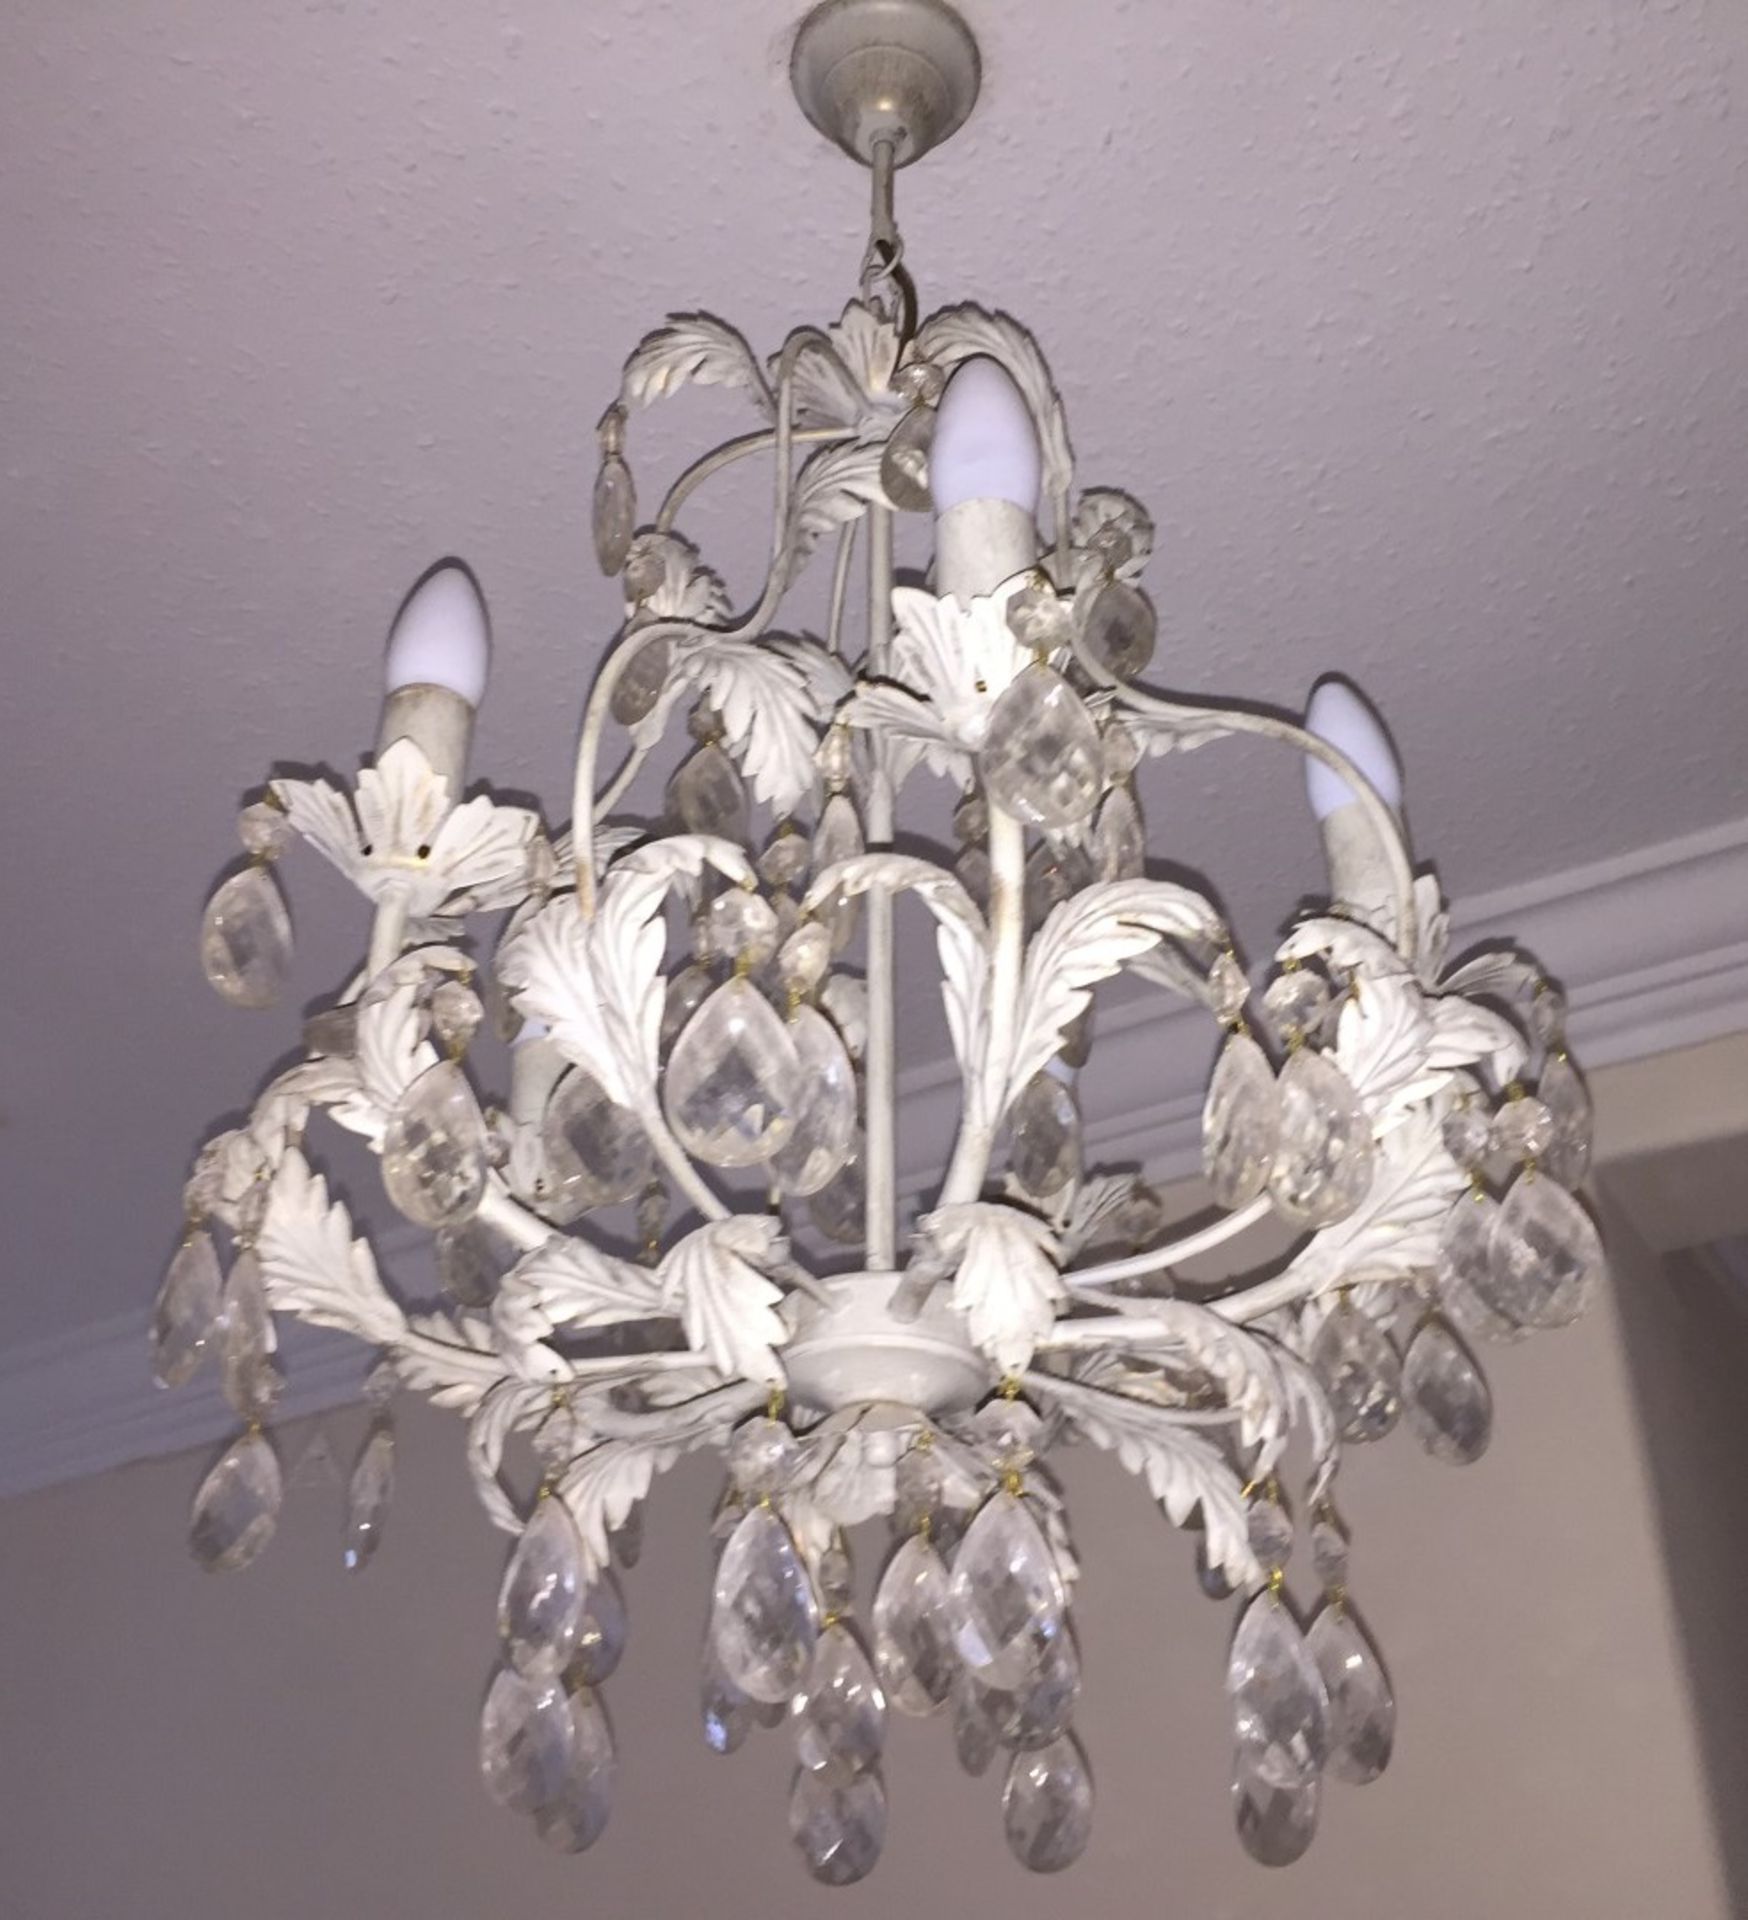 2 x Pendant Chandeliers - Both With Ornate Metal Leaf Design In Cream and Clear Droplet Detail - - Bild 2 aus 4